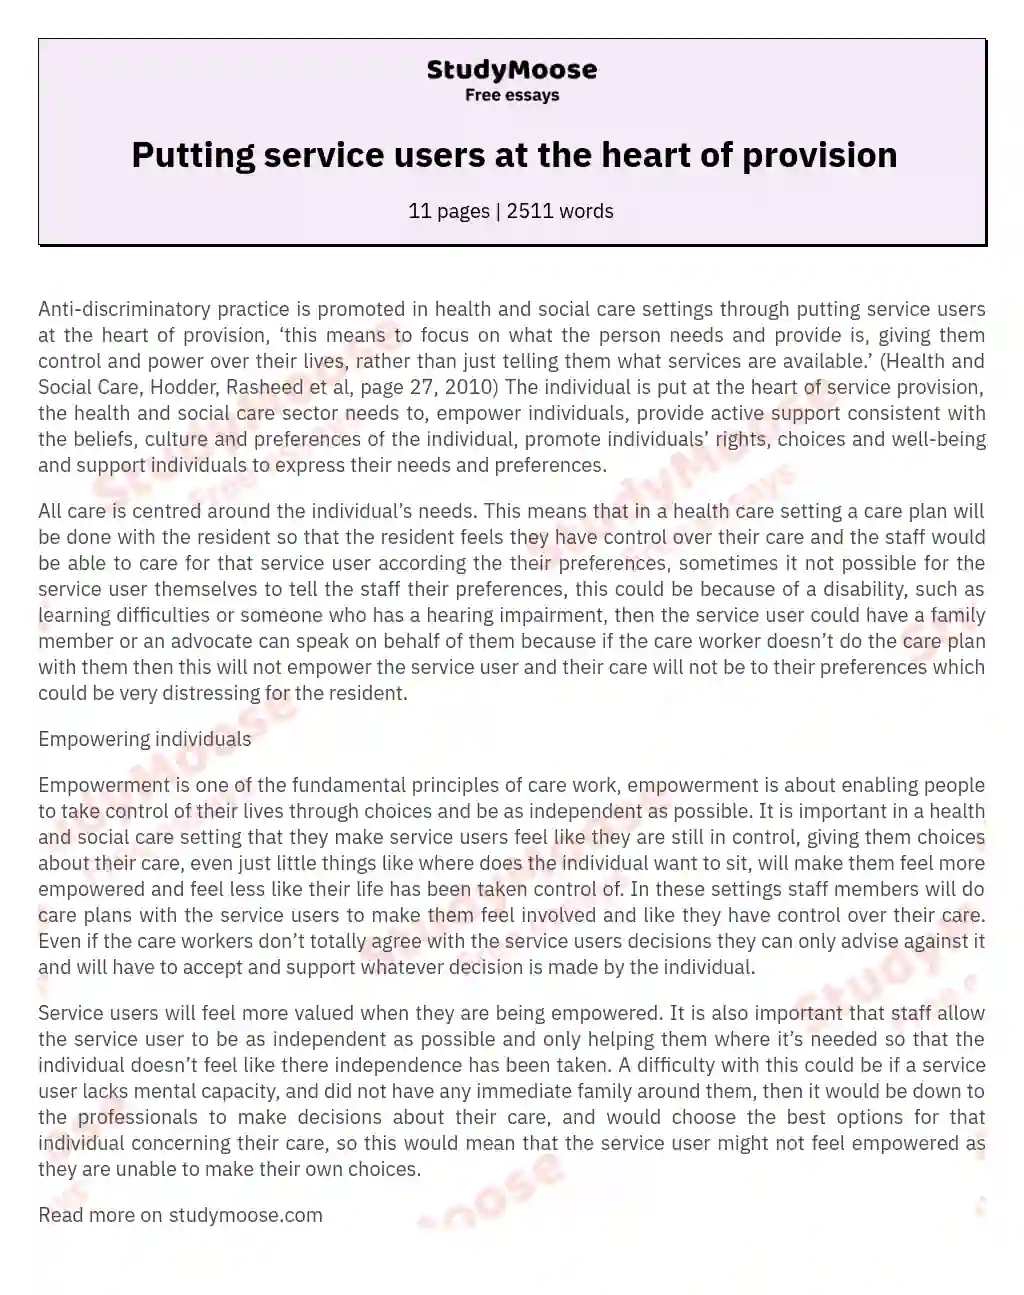 Putting service users at the heart of provision